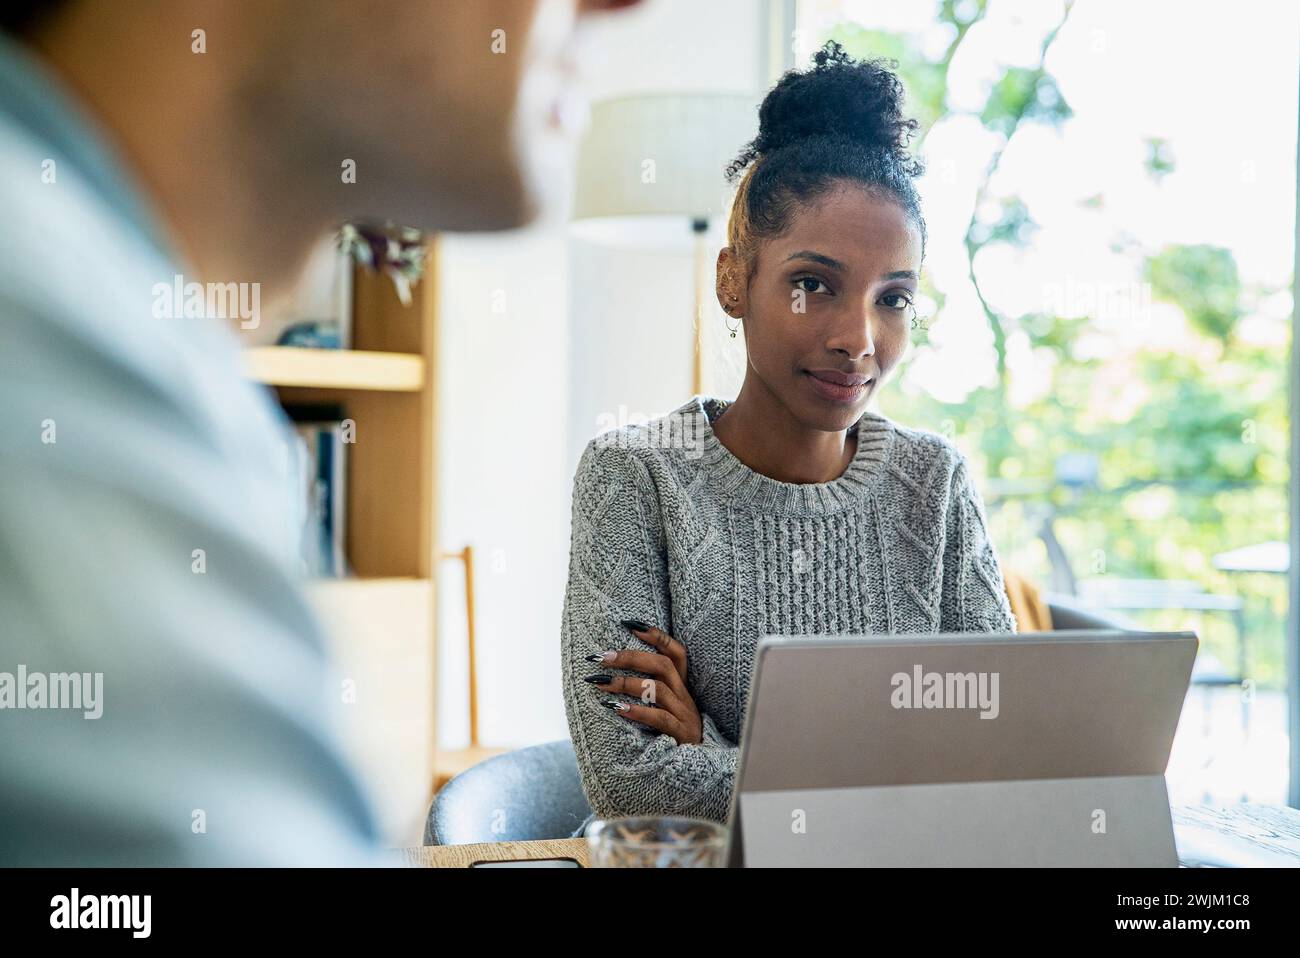 Young adult African American coworker looking at the camera while using digital tablet Stock Photo